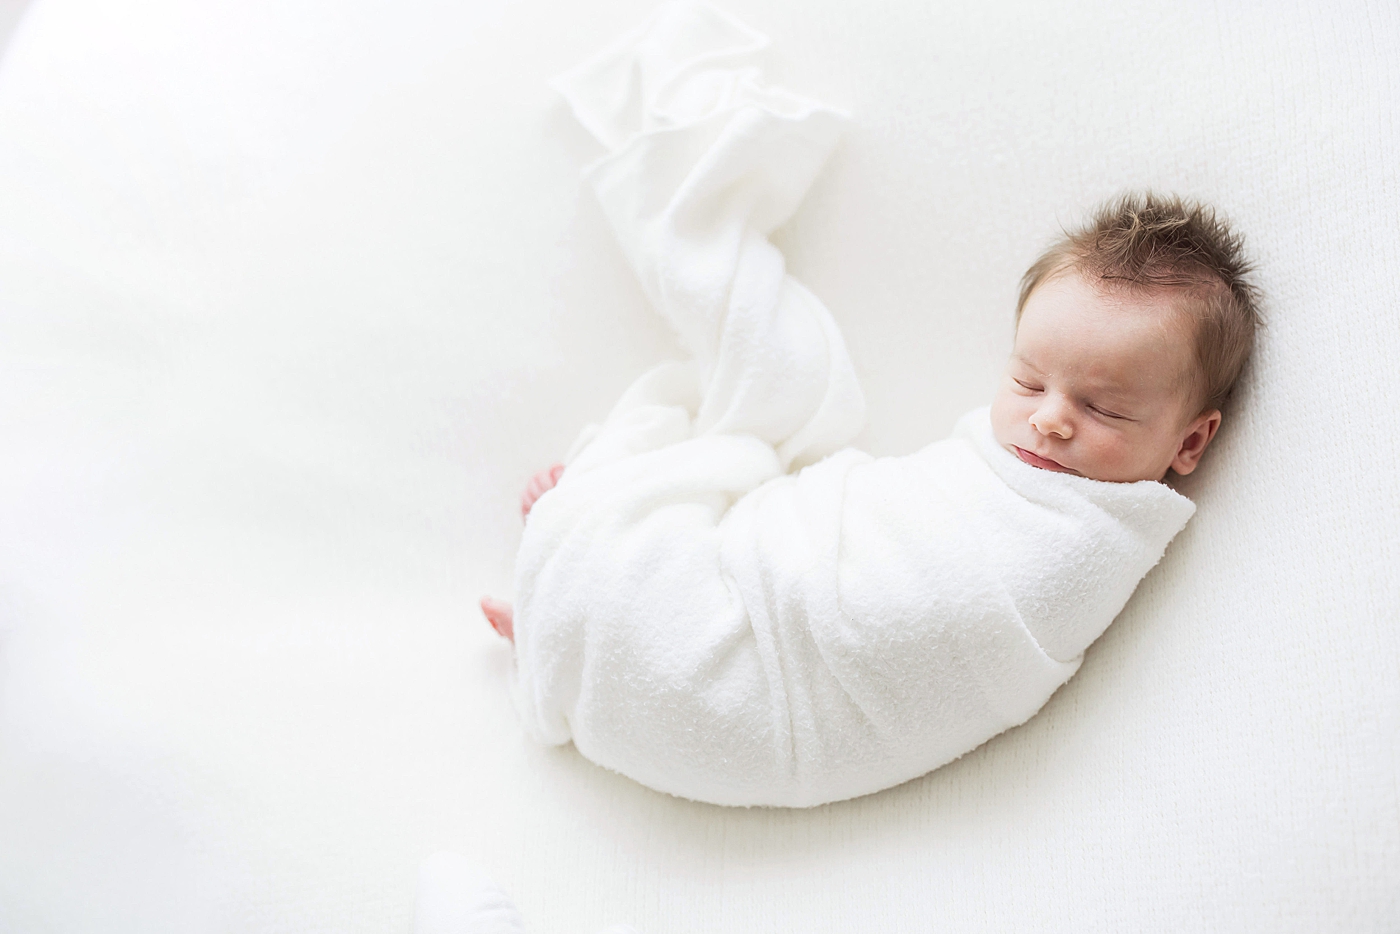 Baby boy swaddled in white, sleeping. Photo by Fresh Light Photography.